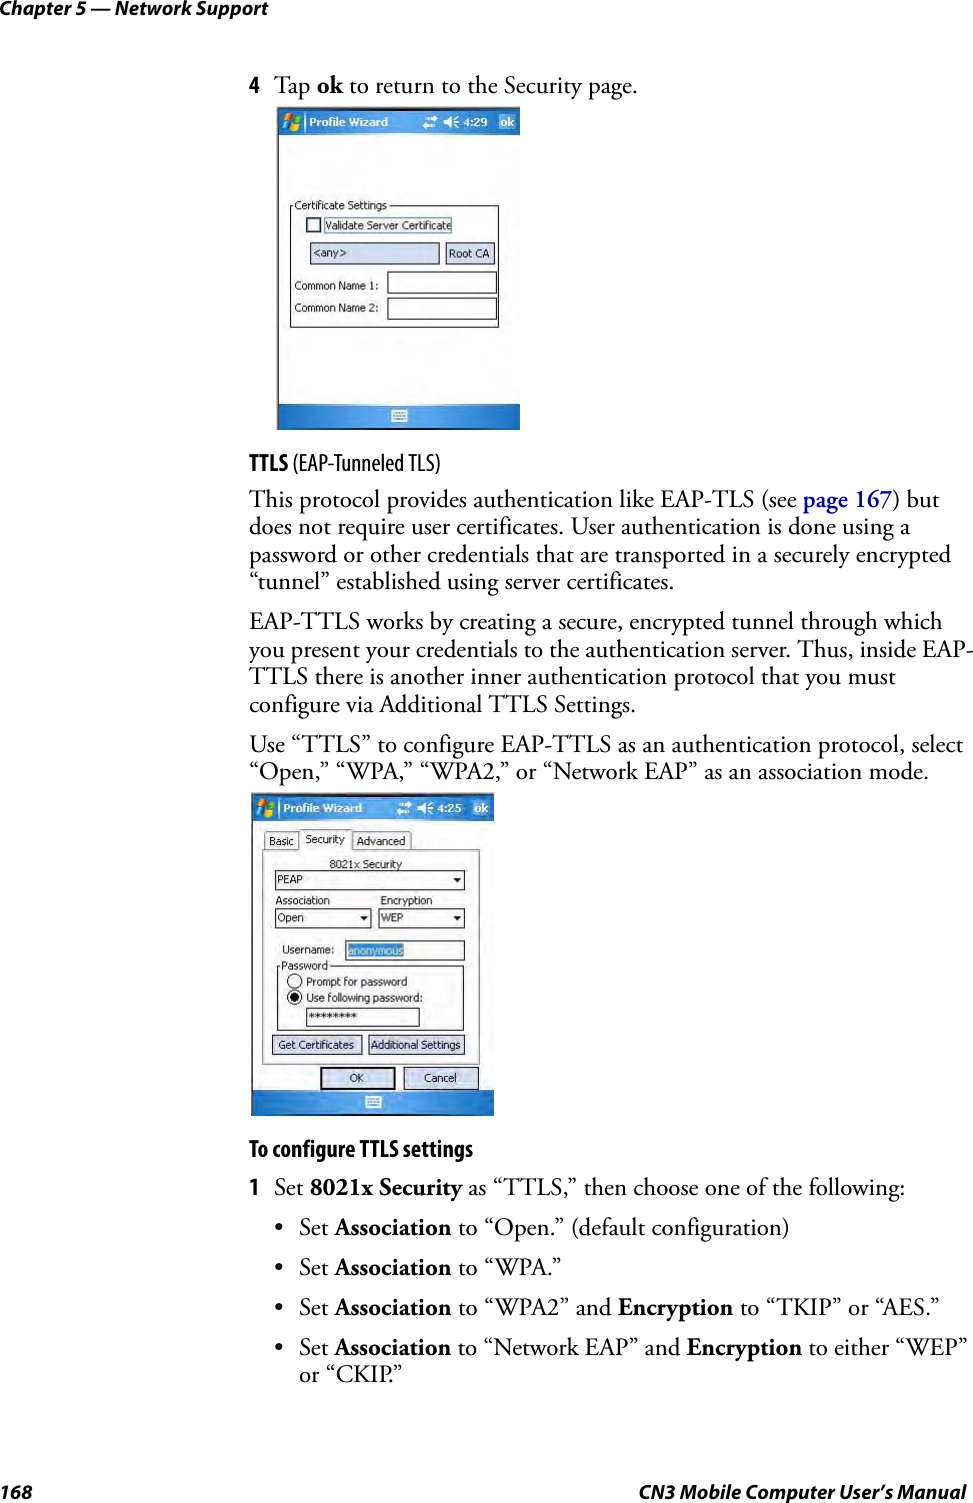 Chapter 5 — Network Support168 CN3 Mobile Computer User’s Manual4Tap ok to return to the Security page.TTLS (EAP-Tunneled TLS)This protocol provides authentication like EAP-TLS (see page 167) but does not require user certificates. User authentication is done using a password or other credentials that are transported in a securely encrypted “tunnel” established using server certificates.EAP-TTLS works by creating a secure, encrypted tunnel through which you present your credentials to the authentication server. Thus, inside EAP-TTLS there is another inner authentication protocol that you must configure via Additional TTLS Settings.Use “TTLS” to configure EAP-TTLS as an authentication protocol, select “Open,” “WPA,” “WPA2,” or “Network EAP” as an association mode.To configure TTLS settings1Set 8021x Security as “TTLS,” then choose one of the following:•Set Association to “Open.” (default configuration)•Set Association to “WPA.”•Set Association to “WPA2” and Encryption to “TKIP” or “AES.”•Set Association to “Network EAP” and Encryption to either “WEP” or “CKIP.”